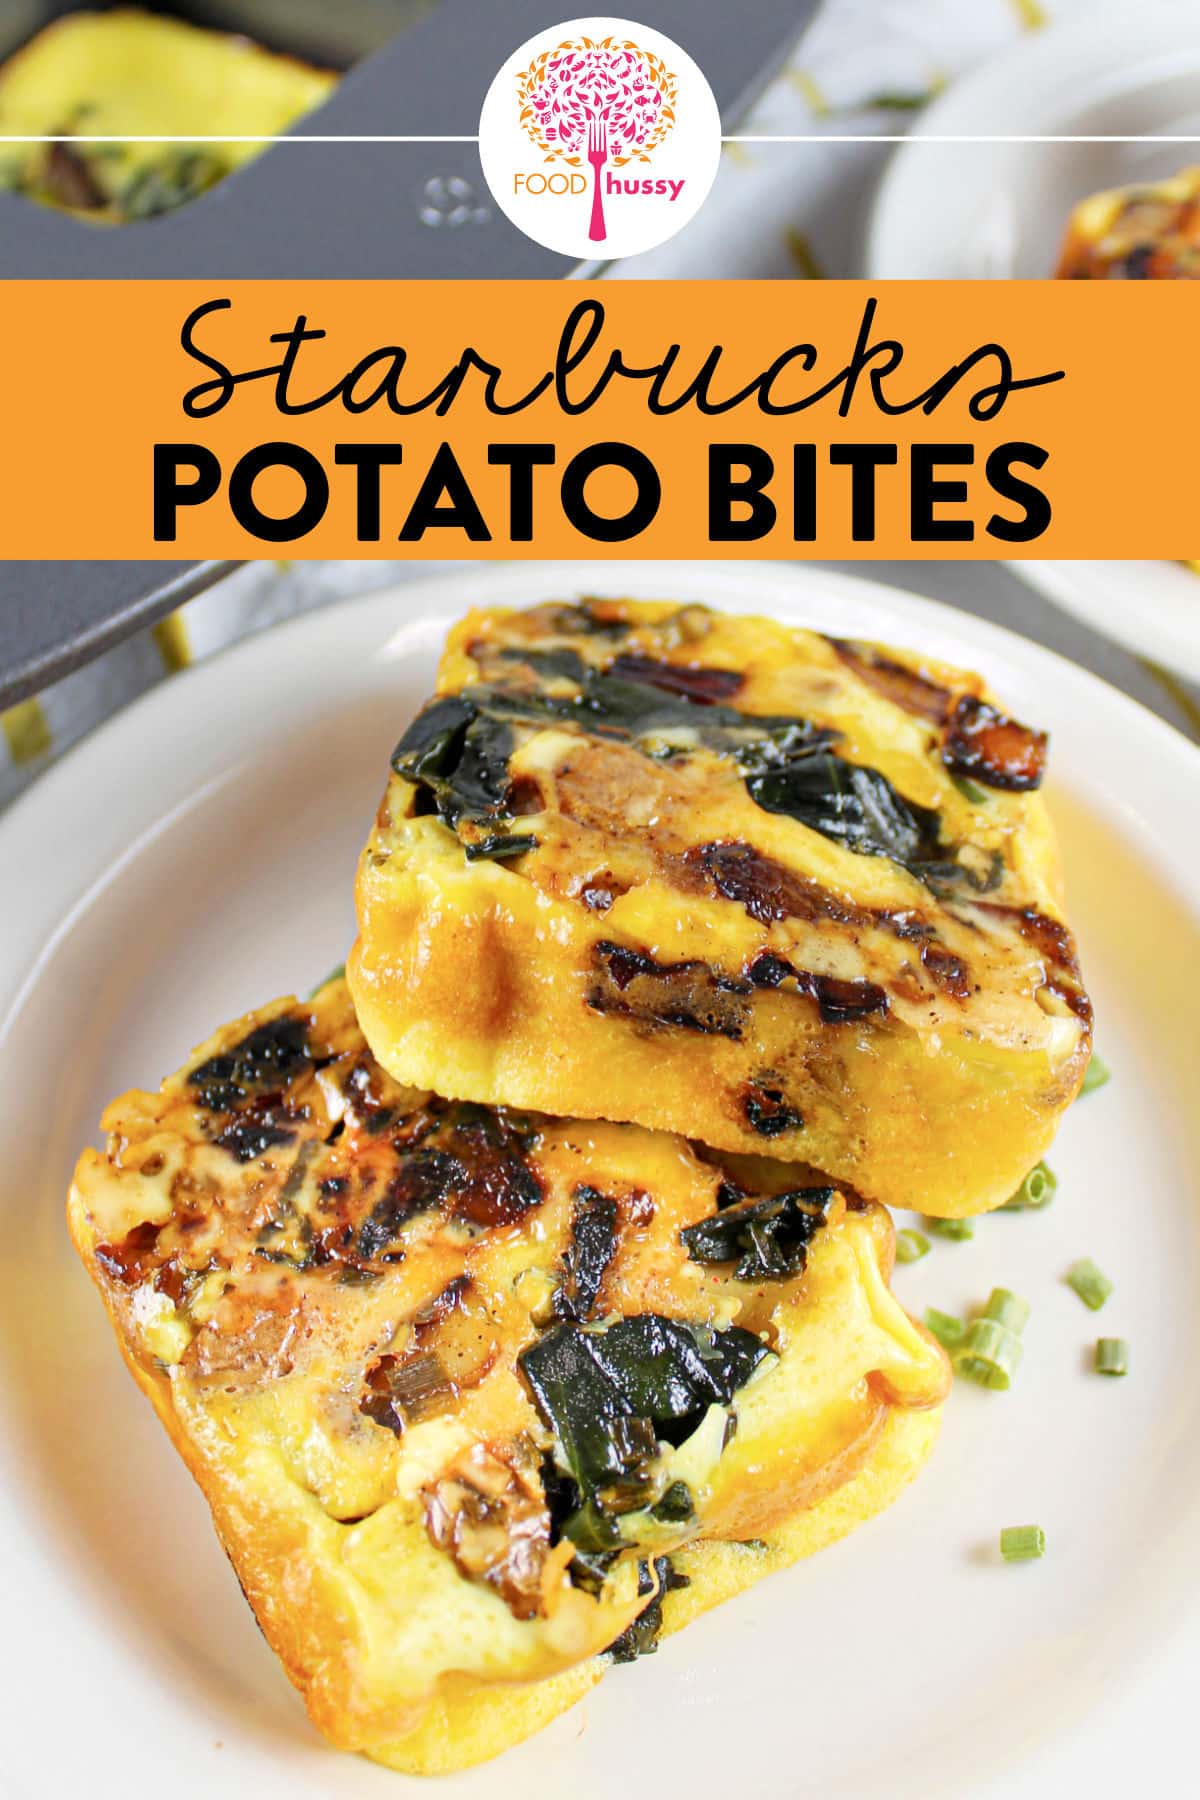 Starbucks new Potato Cheddar Chive Bakes are a new menu item that you can now make at home any time! Filled with sautéed red potatoes, onions and spinach layered with cheese and light, fluffy eggs - these bites are a perfect breakfast snack! via @foodhussy